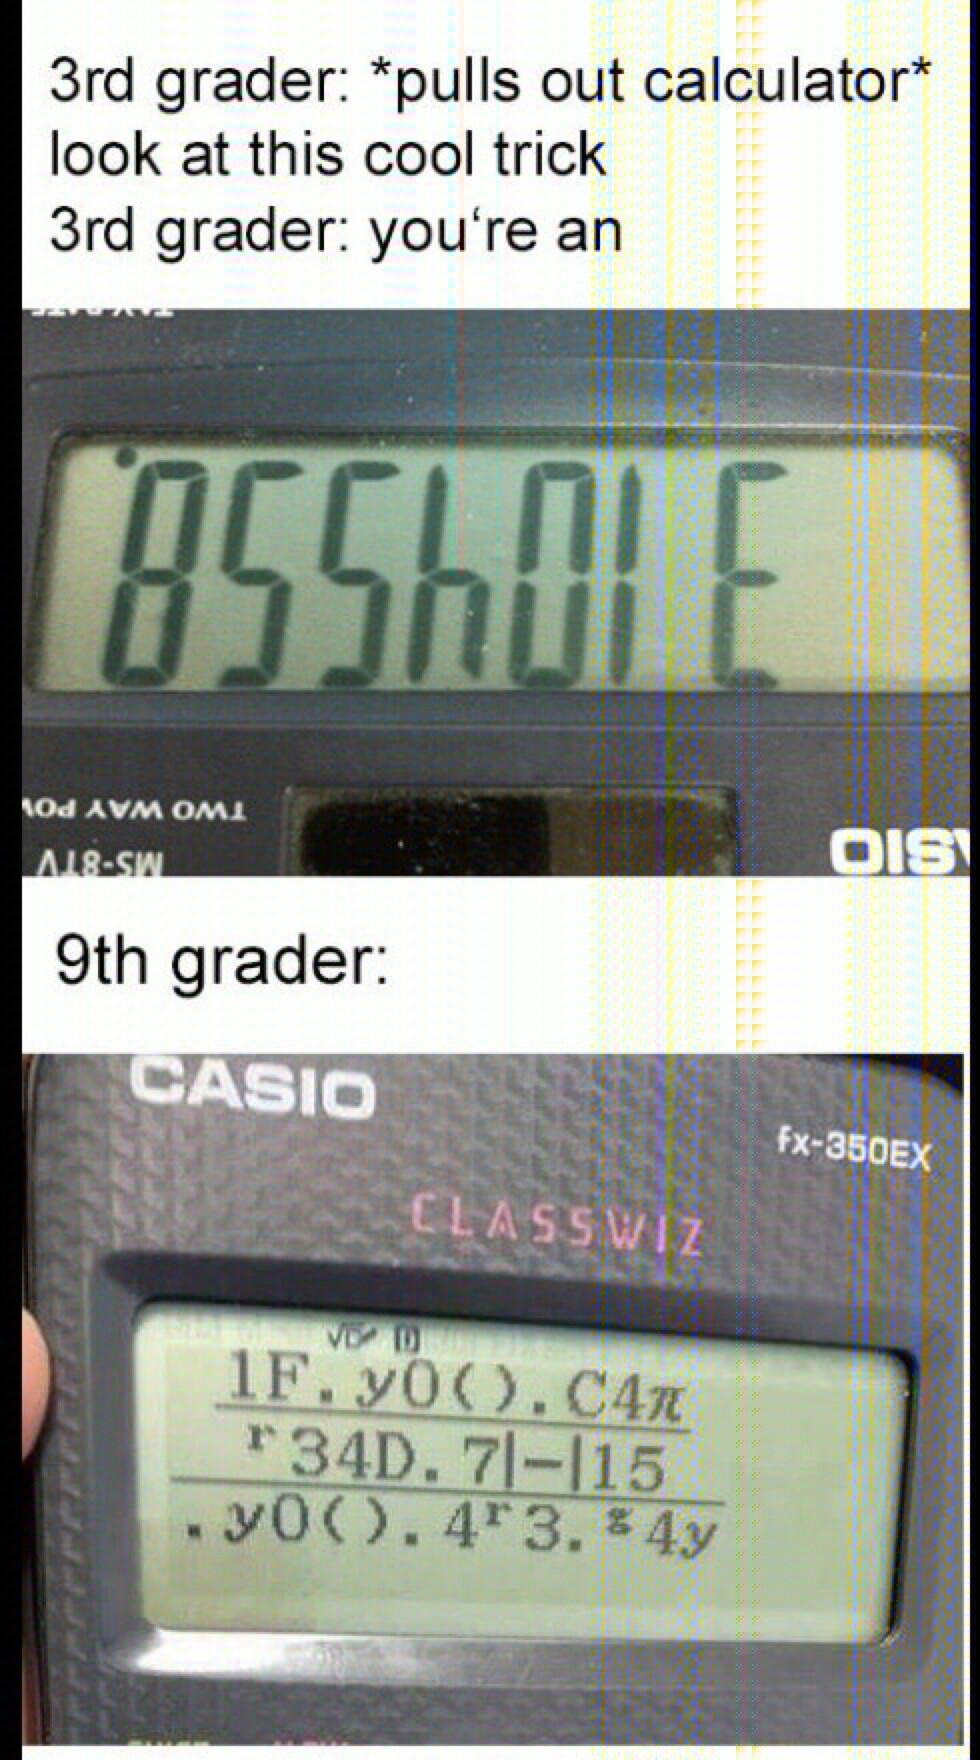 electronics - 3rd grader pulls out calculator look at this cool trick 3rd grader you're an O 05ShOLE Od Avm Omi 418Sw Sio 9th grader Casio fx350EX Class Wiz Vdu 1F.yo. C47 34D. 71115 .y0.413. % 4y